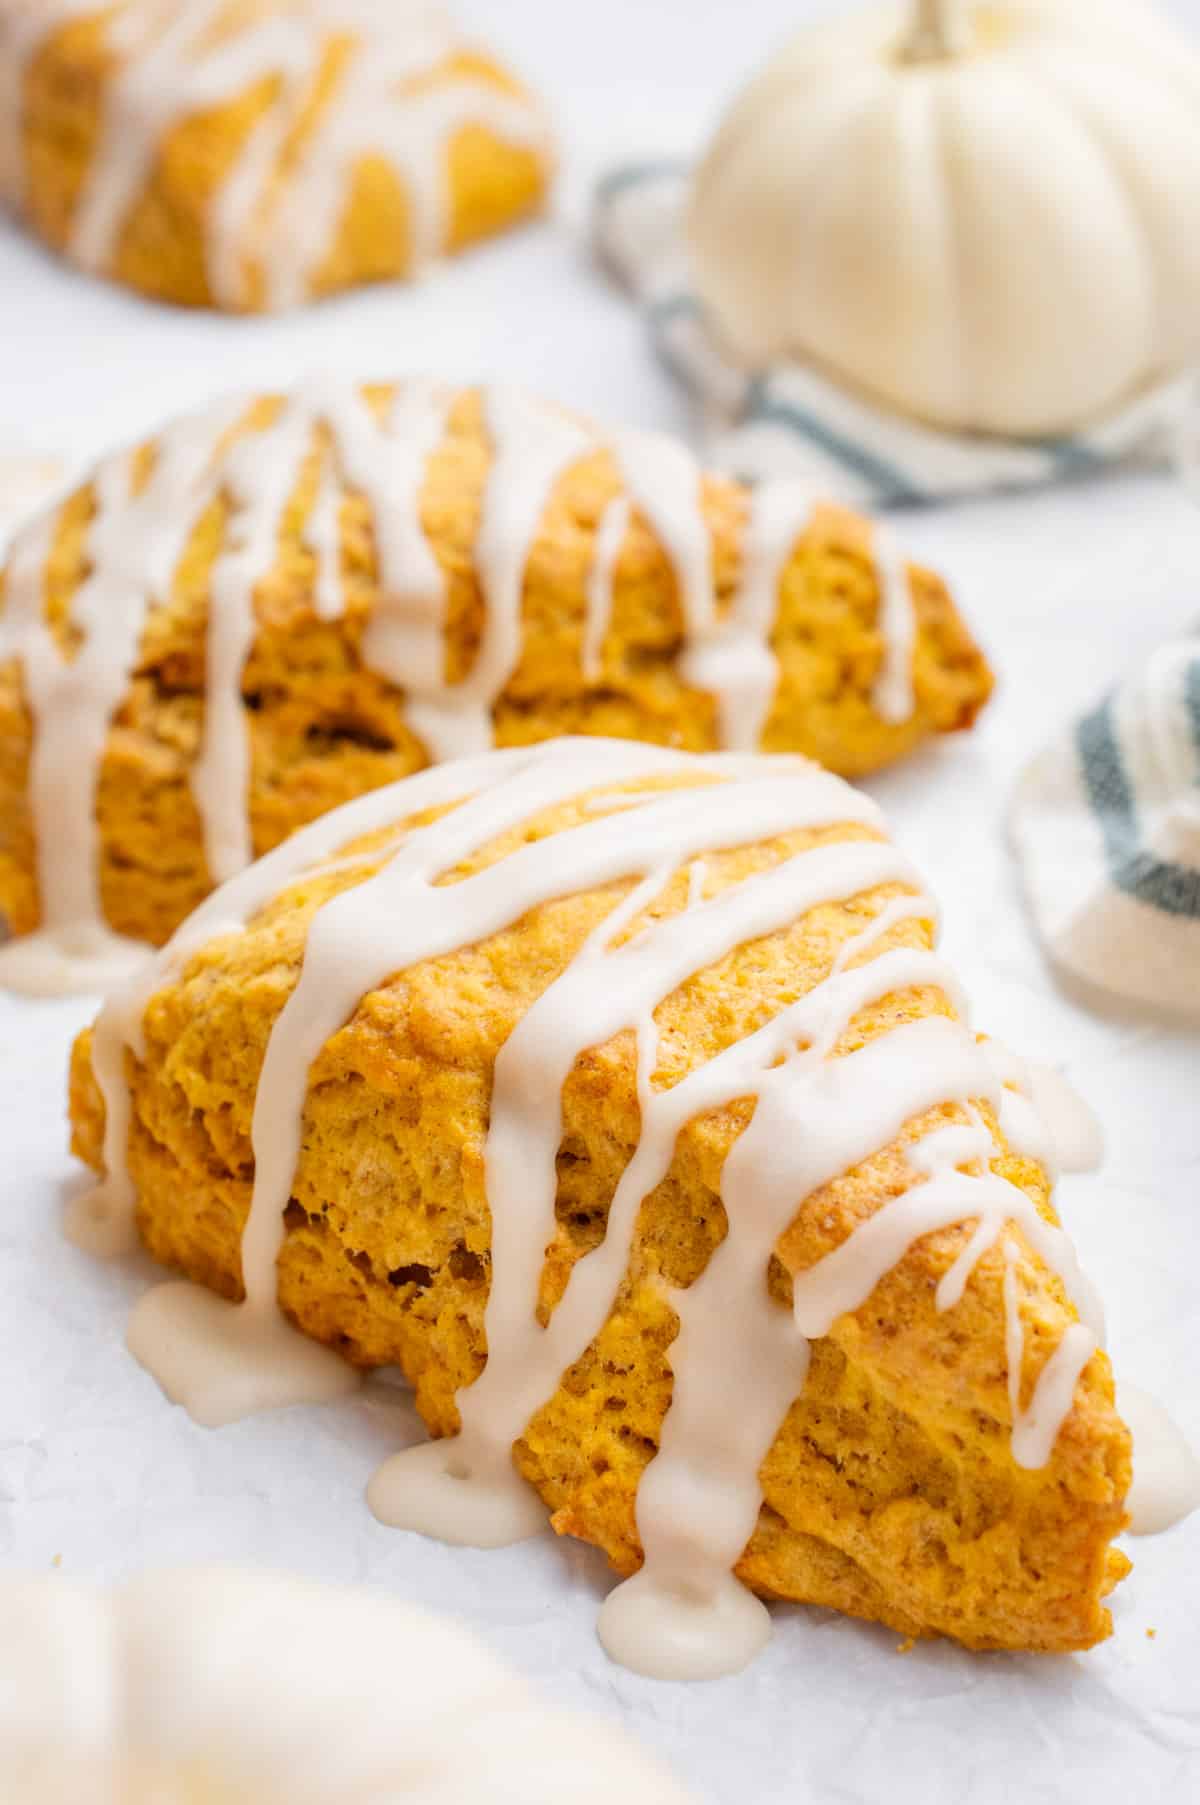 Two vegan pumpkin scones drizzled with a glaze.